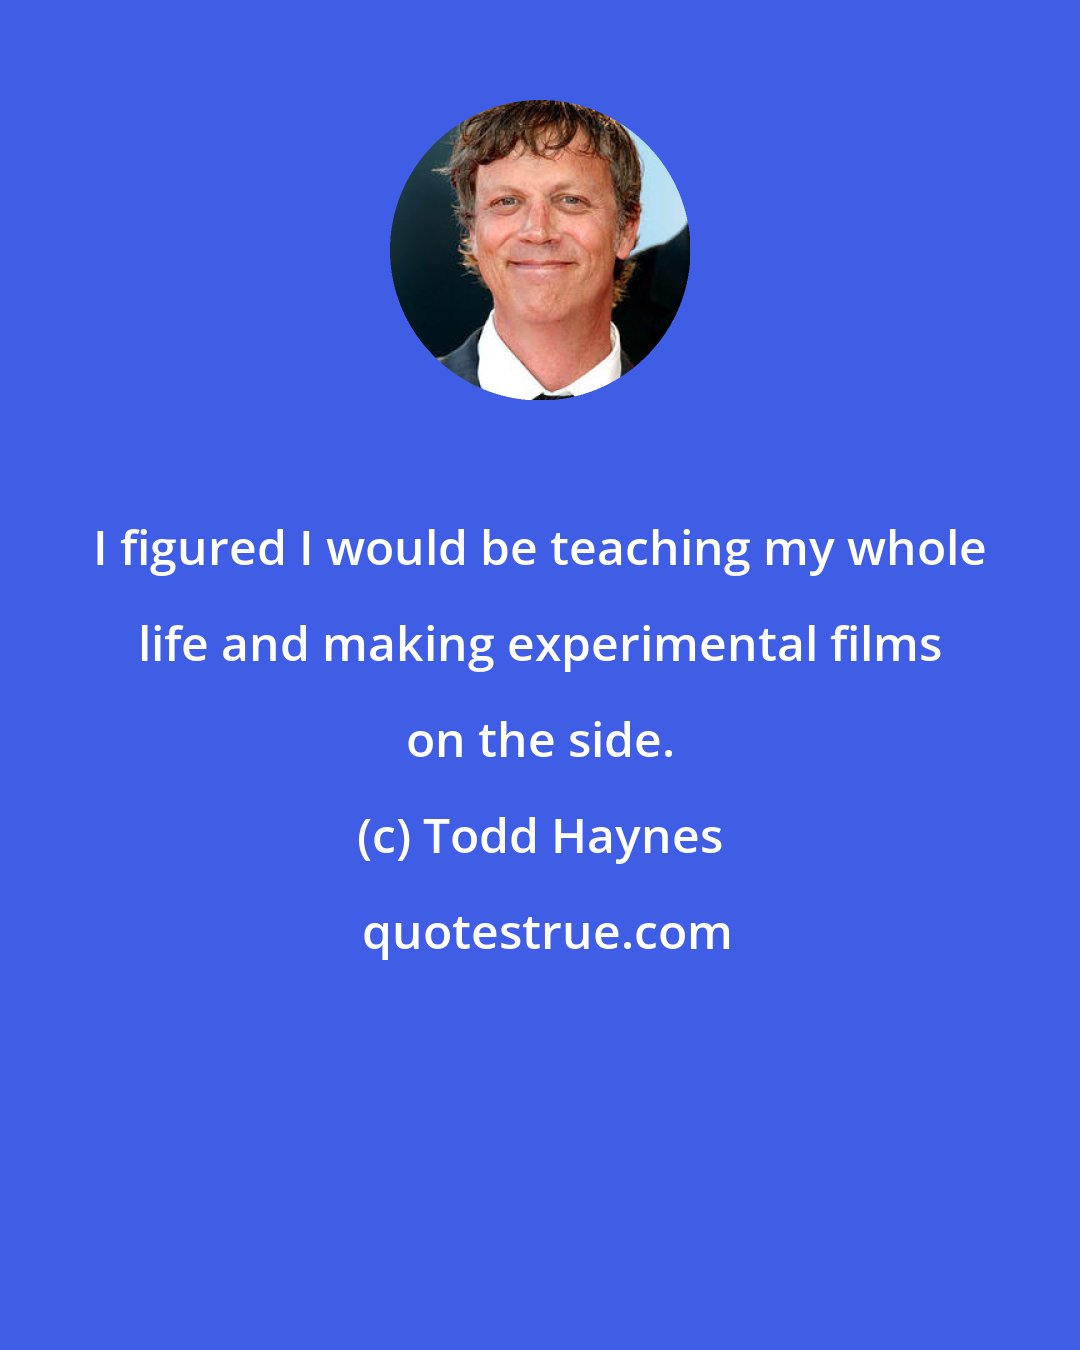 Todd Haynes: I figured I would be teaching my whole life and making experimental films on the side.